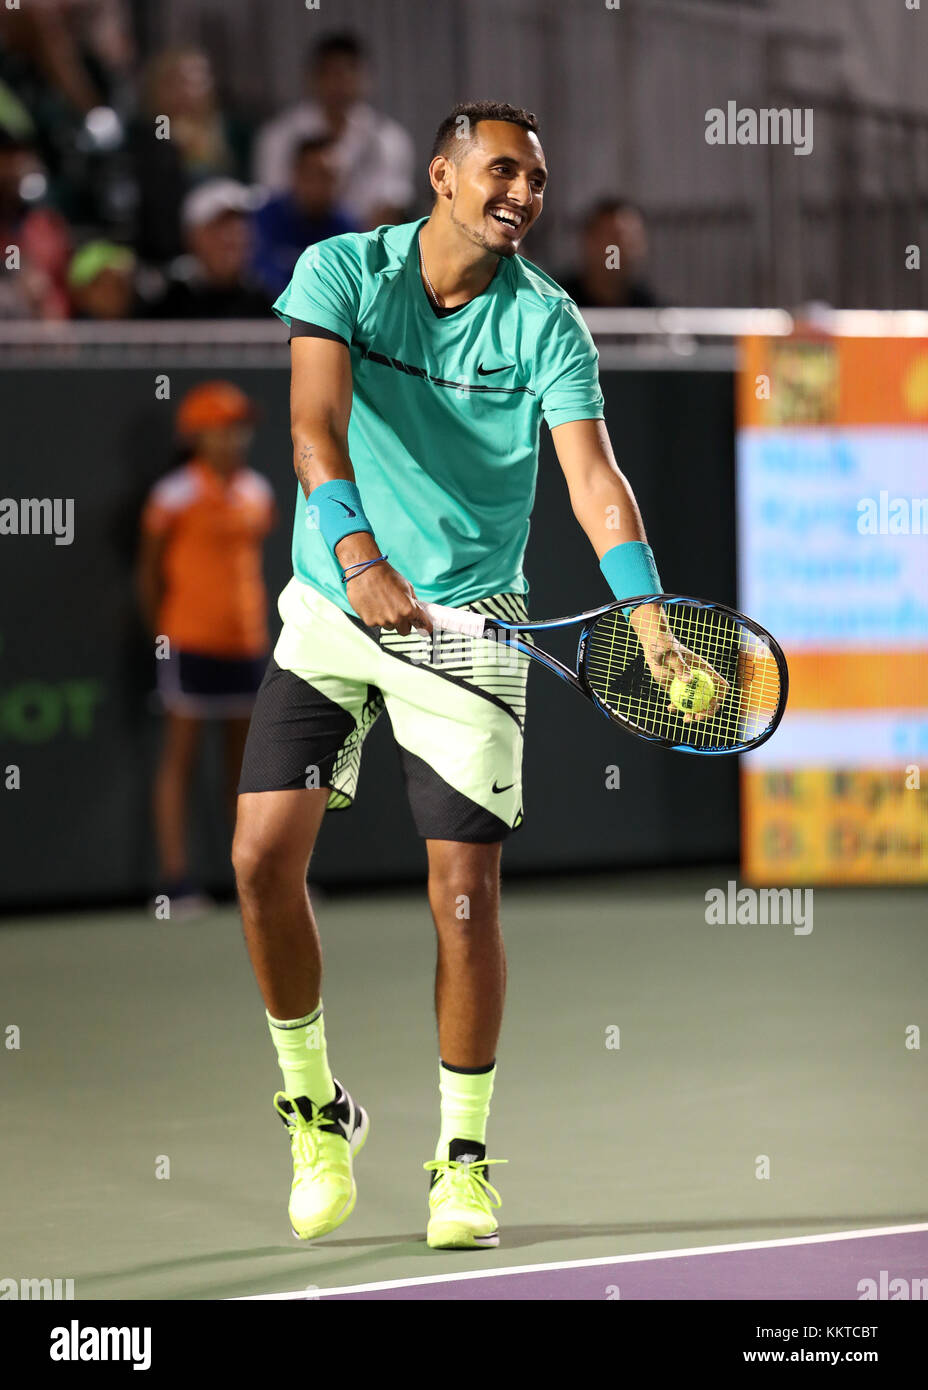 KEY BISCAYNE, FL - MARCH 25: Nick Kyrgios on day 6 of the Miami Open at  Crandon Park Tennis Center on March 25, 2017 in Key Biscayne, Florida  People: Nick Kyrgios Stock Photo - Alamy